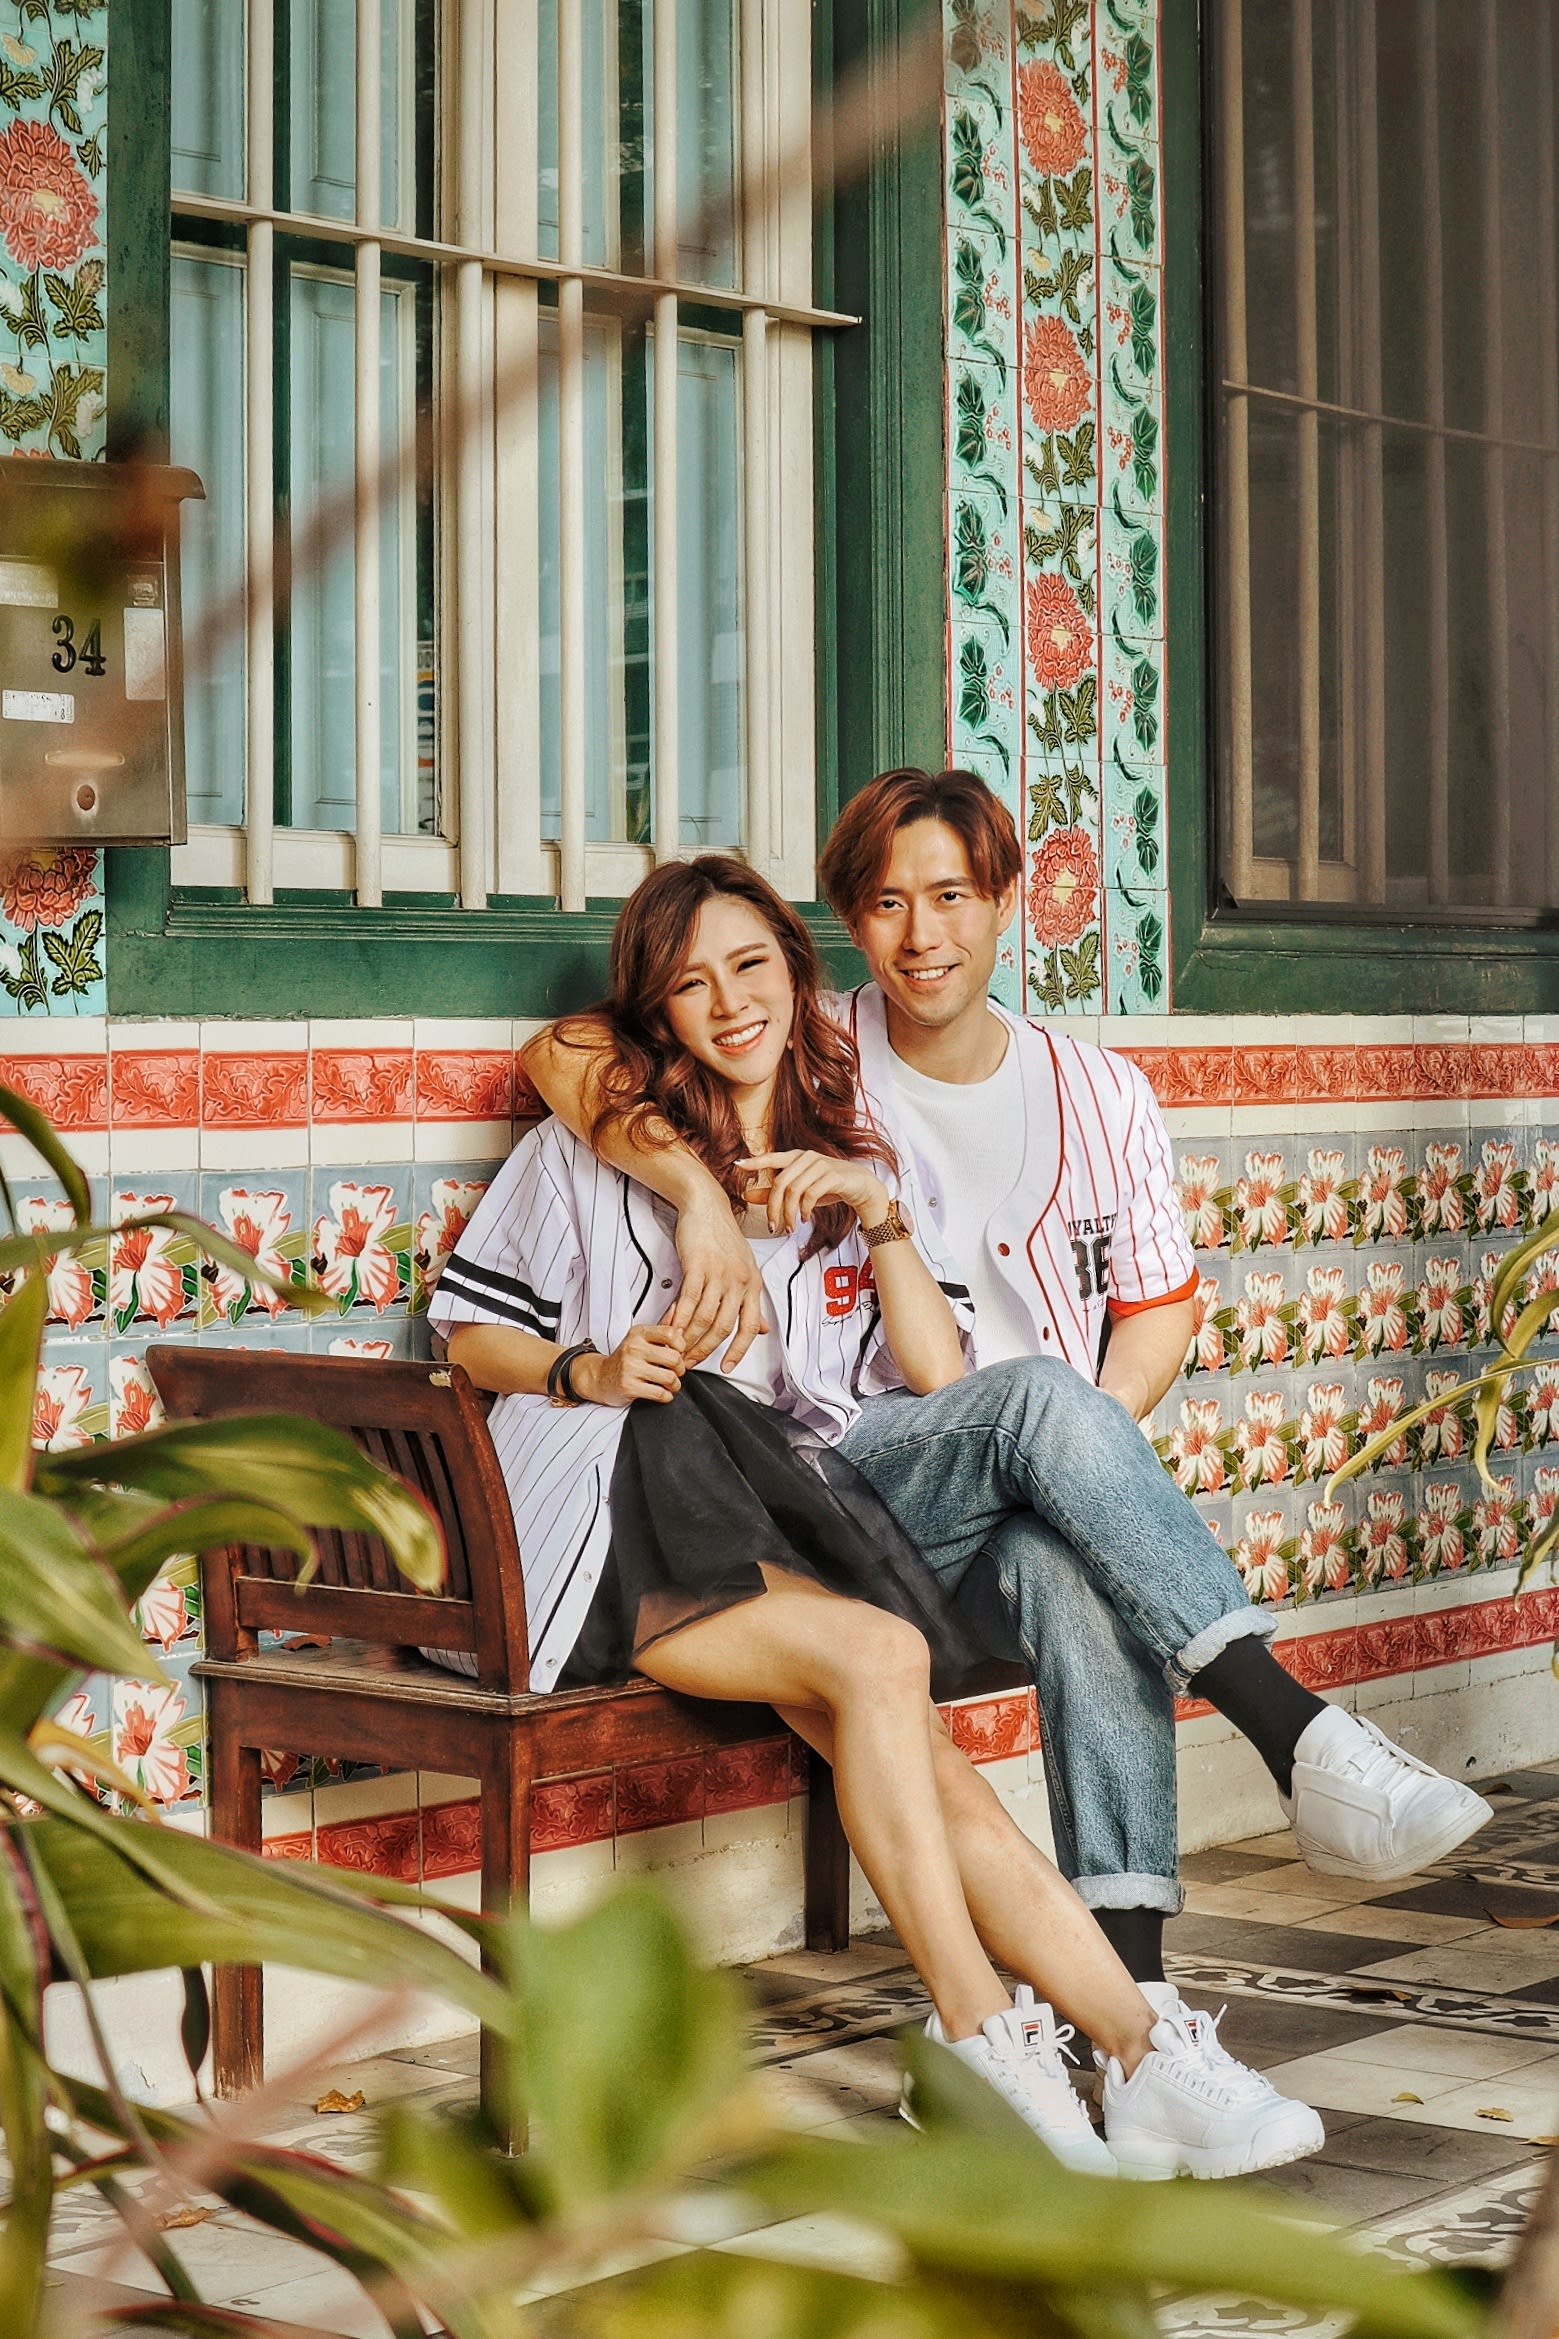 Actor James Seah And His Influencer Girlfriend Nicole Chang Min Just Got A BTO Flat Together, So Where’s The Proposal?